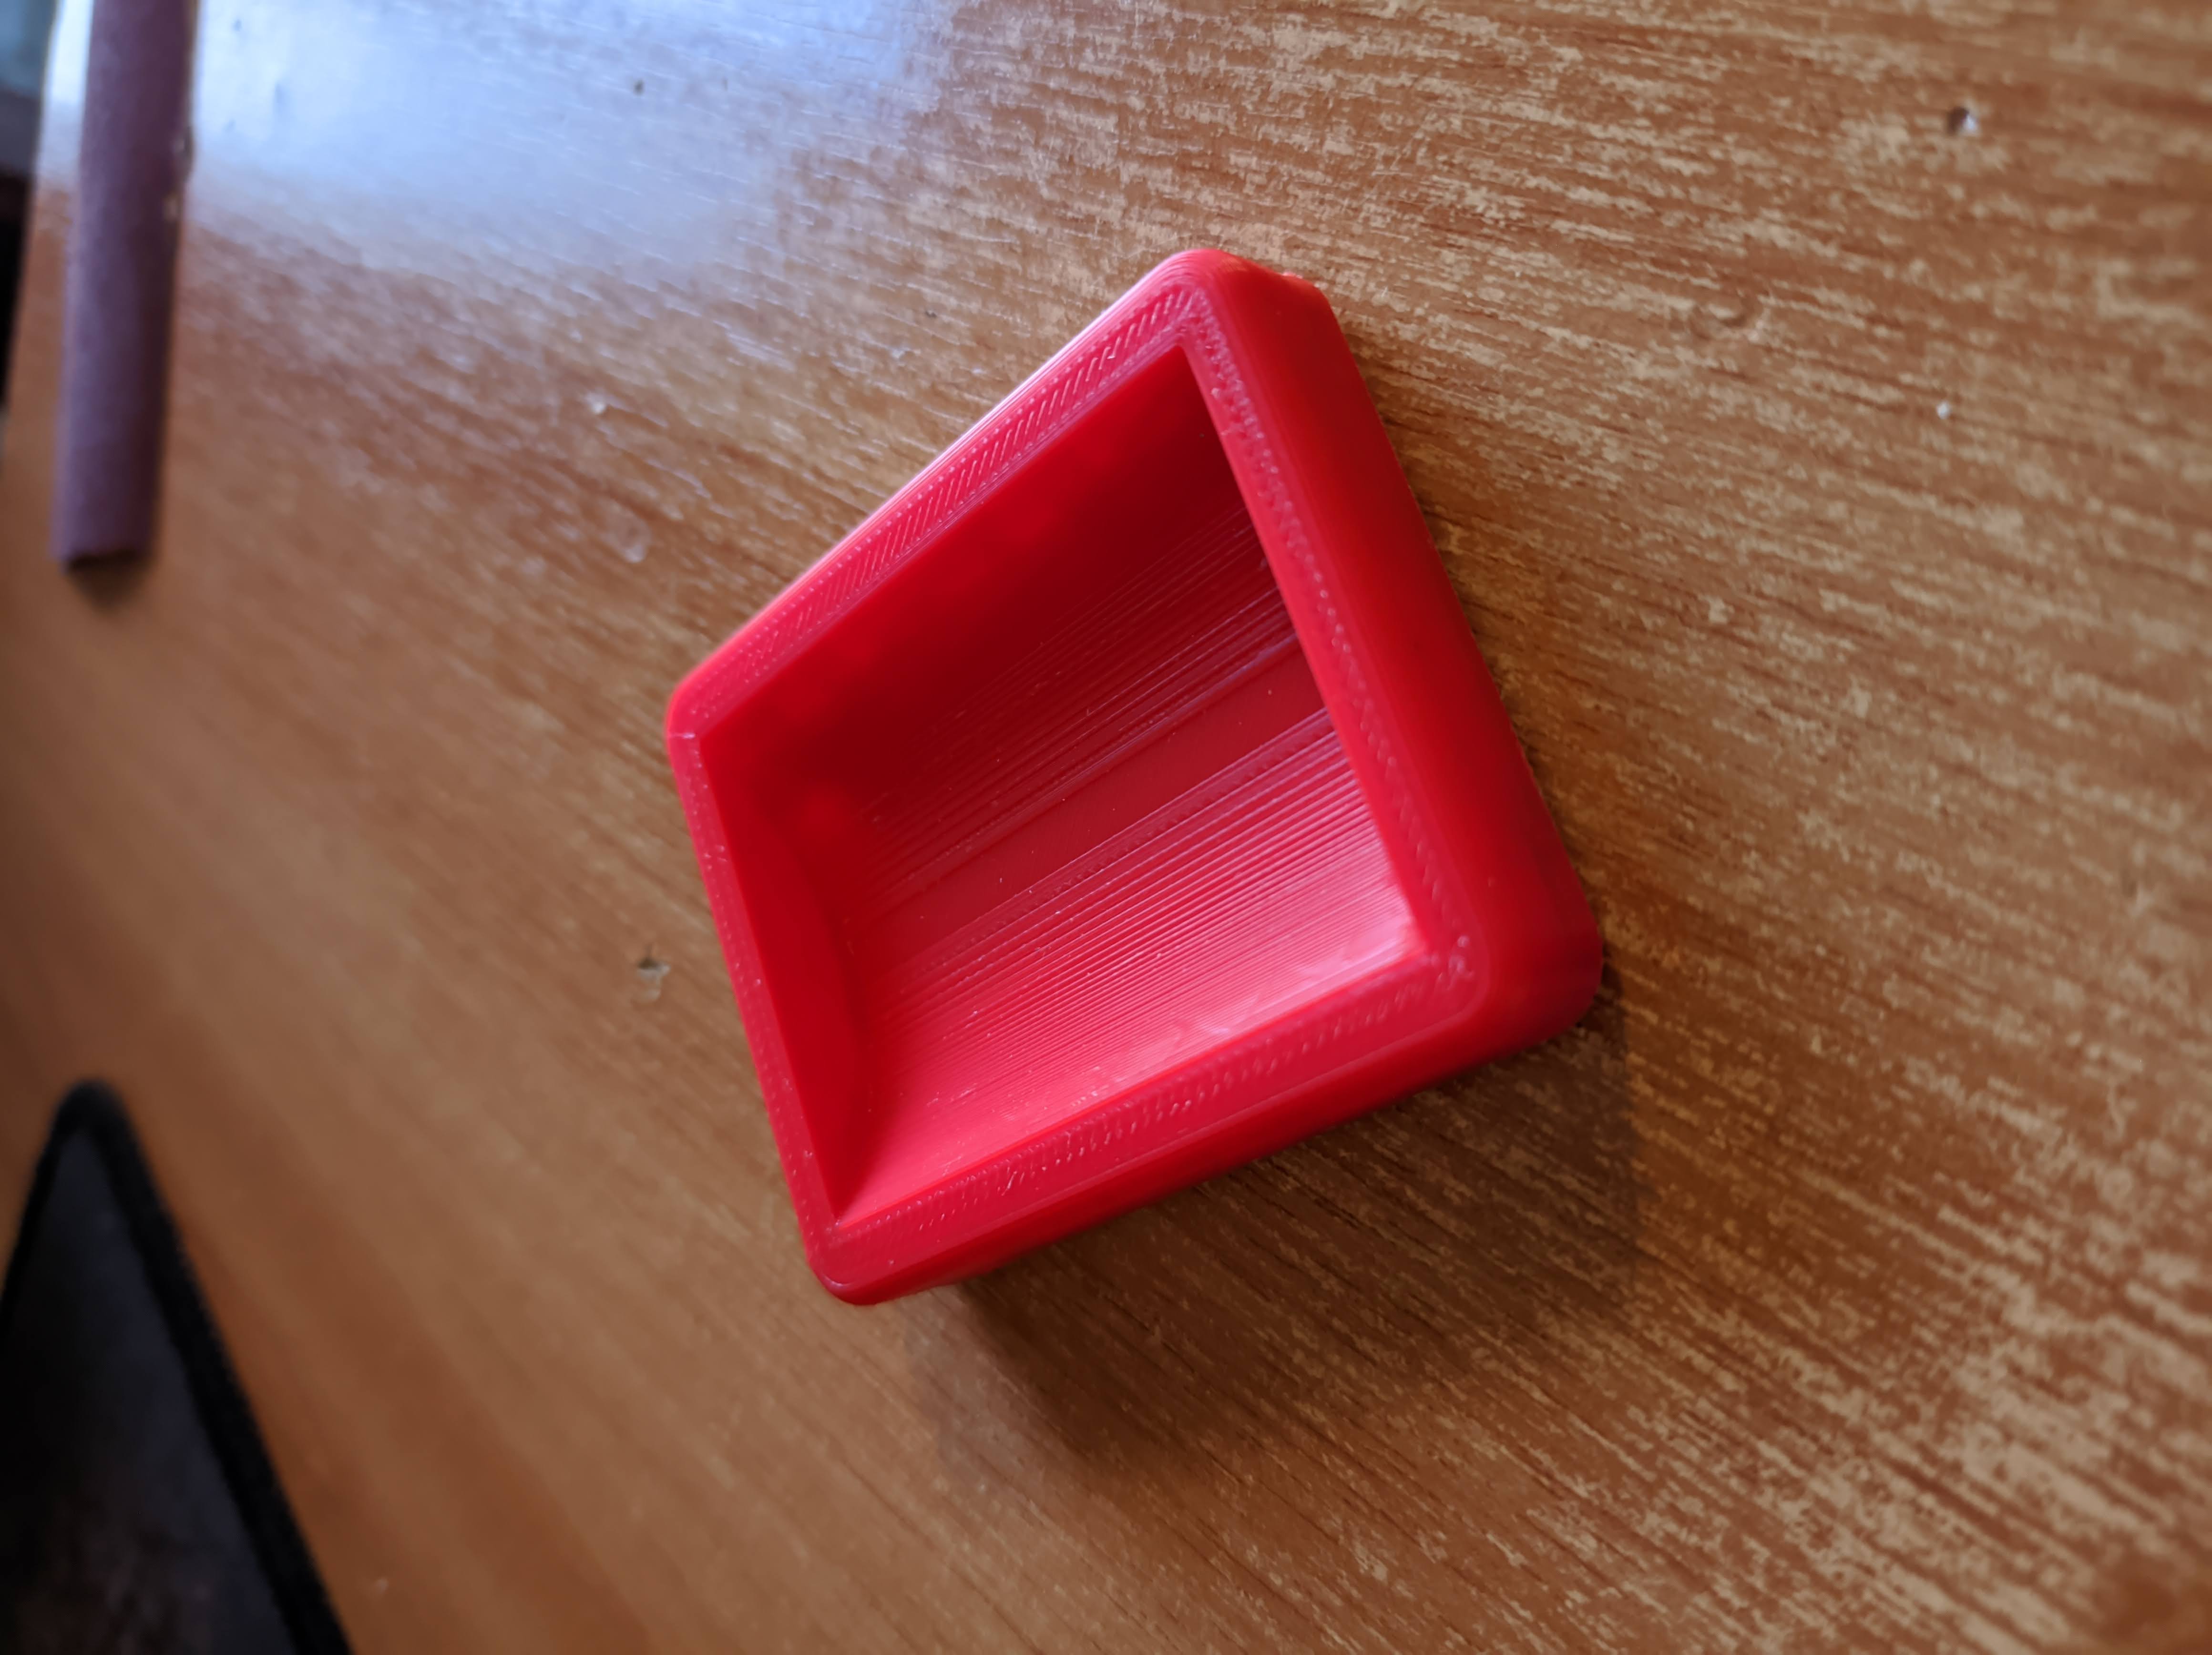 Wheel stopper cup, chair stopper cup